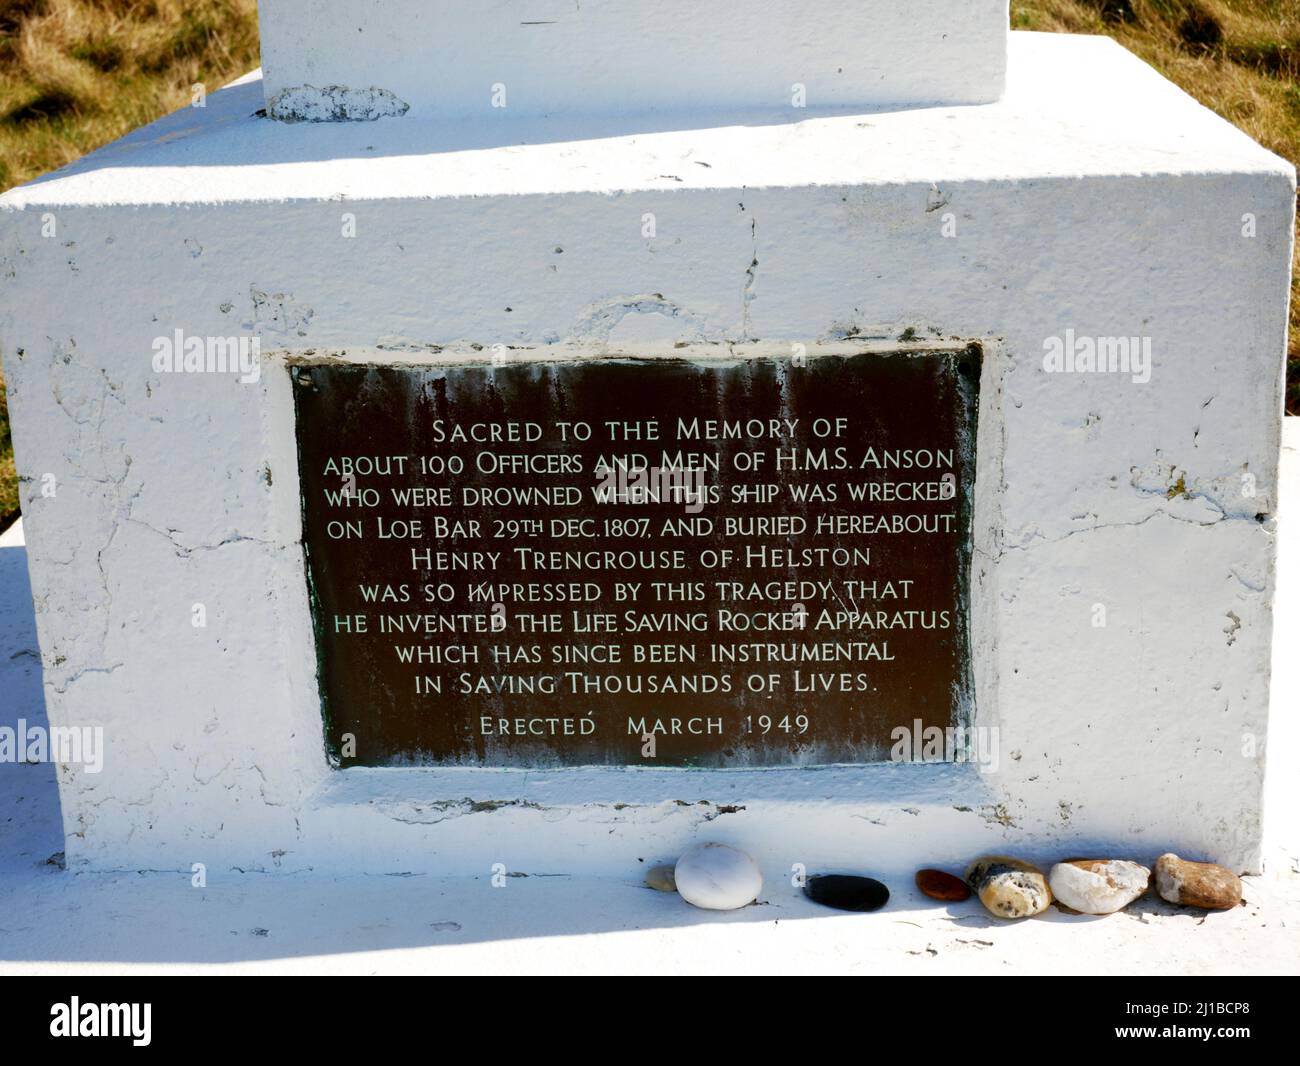 Plaque on memorial to HMS Anson at Loe Bar, Cornwall. Stock Photo